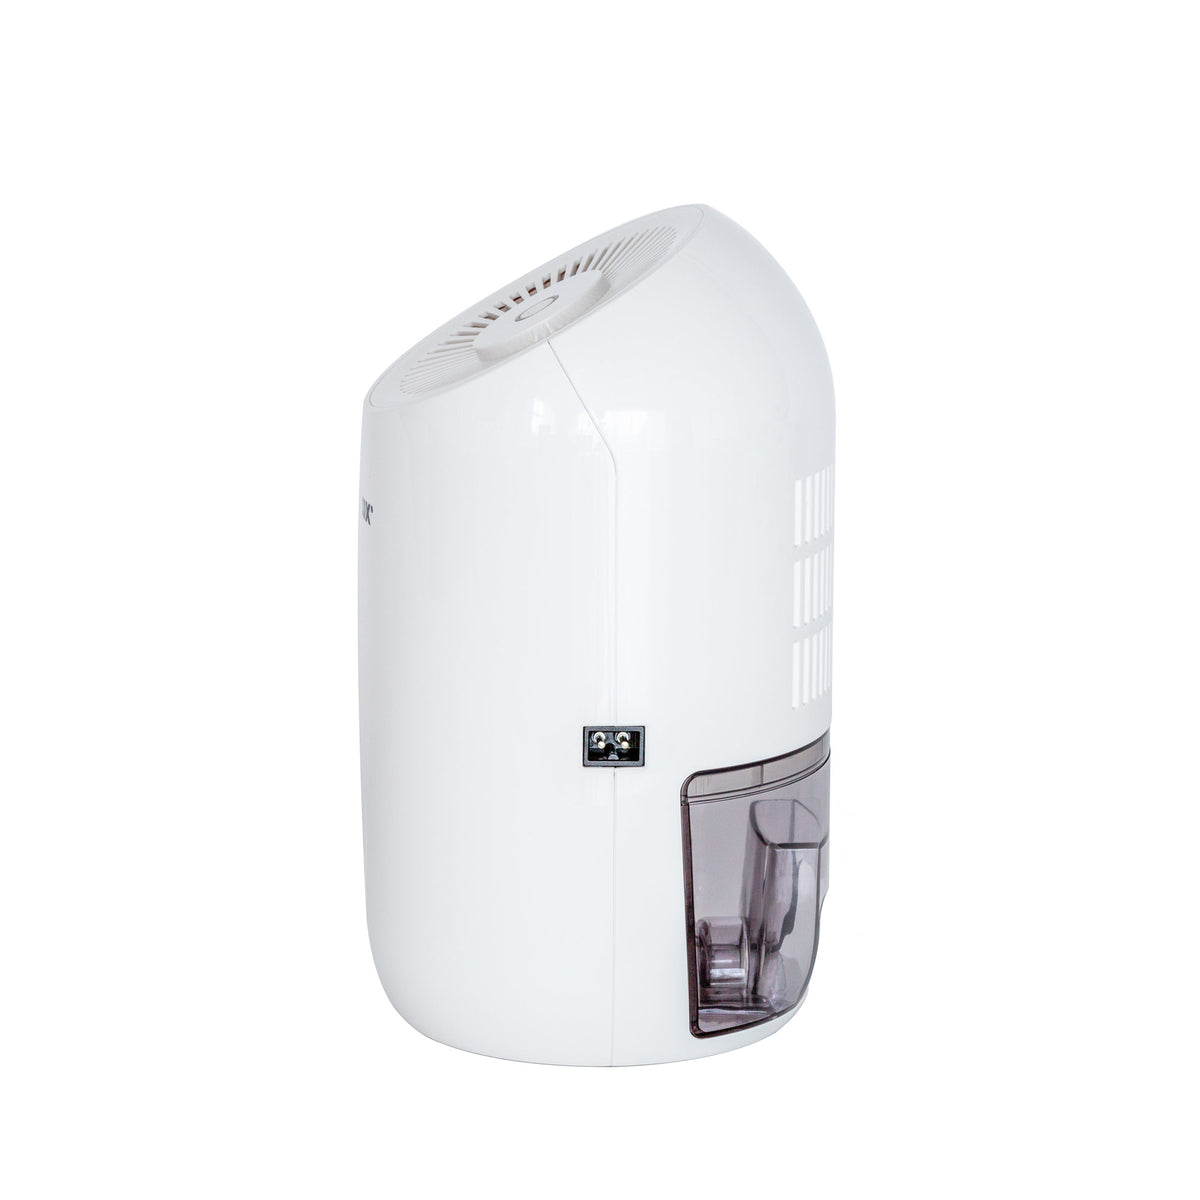 Side view of the white Thermo-Electric Peltier Dehumidifier.